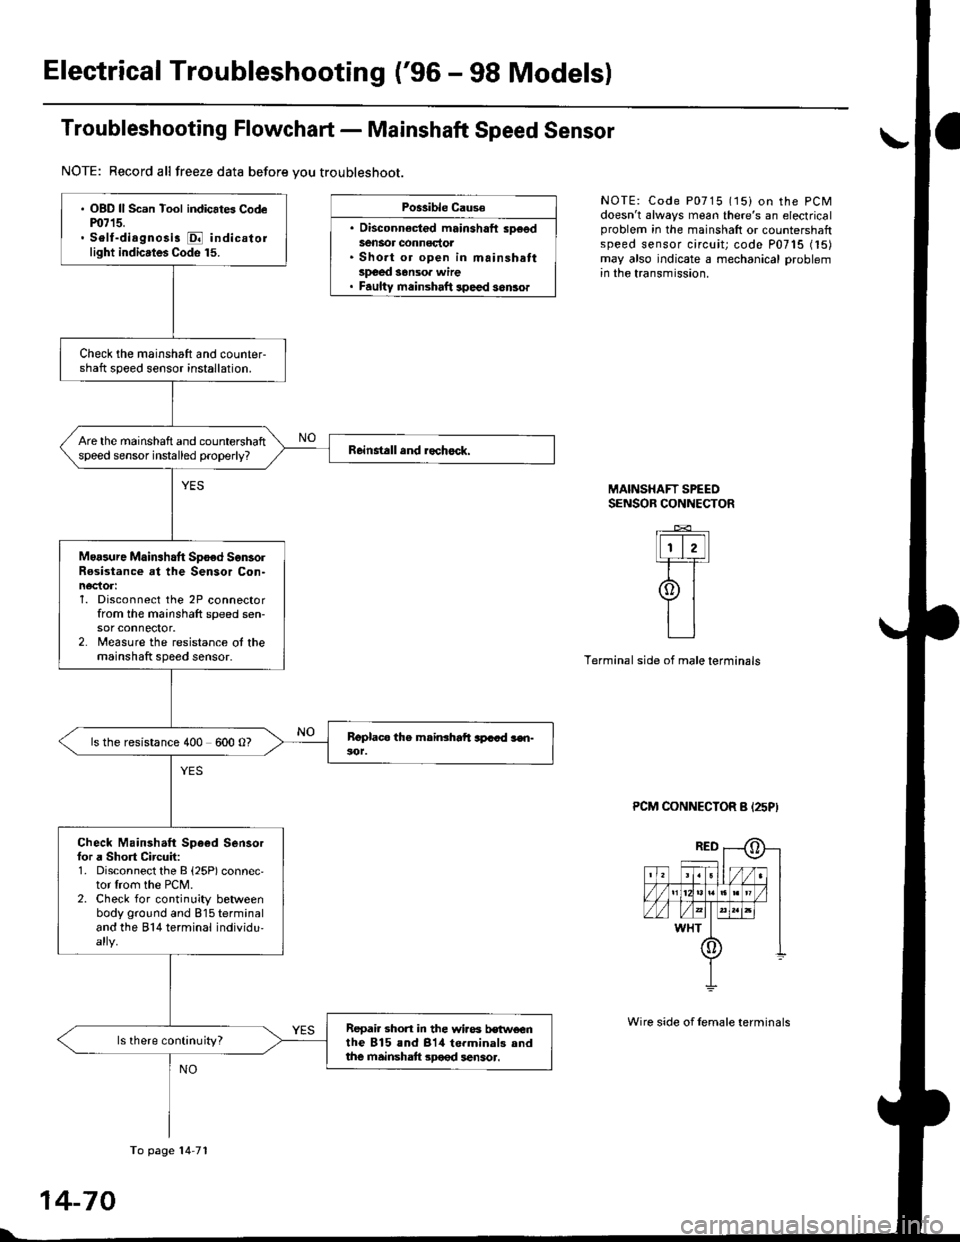 HONDA CIVIC 1998 6.G Service Manual Electrical Troubleshooting (96 - 98 Modelsl
Troubleshooting Flowchart - Mainshaft Speed Sensor
NOTE: Record all freeze data before you troubleshoot.
Po$ible Cause
. Disconnect€d mainshaft sD€edSe